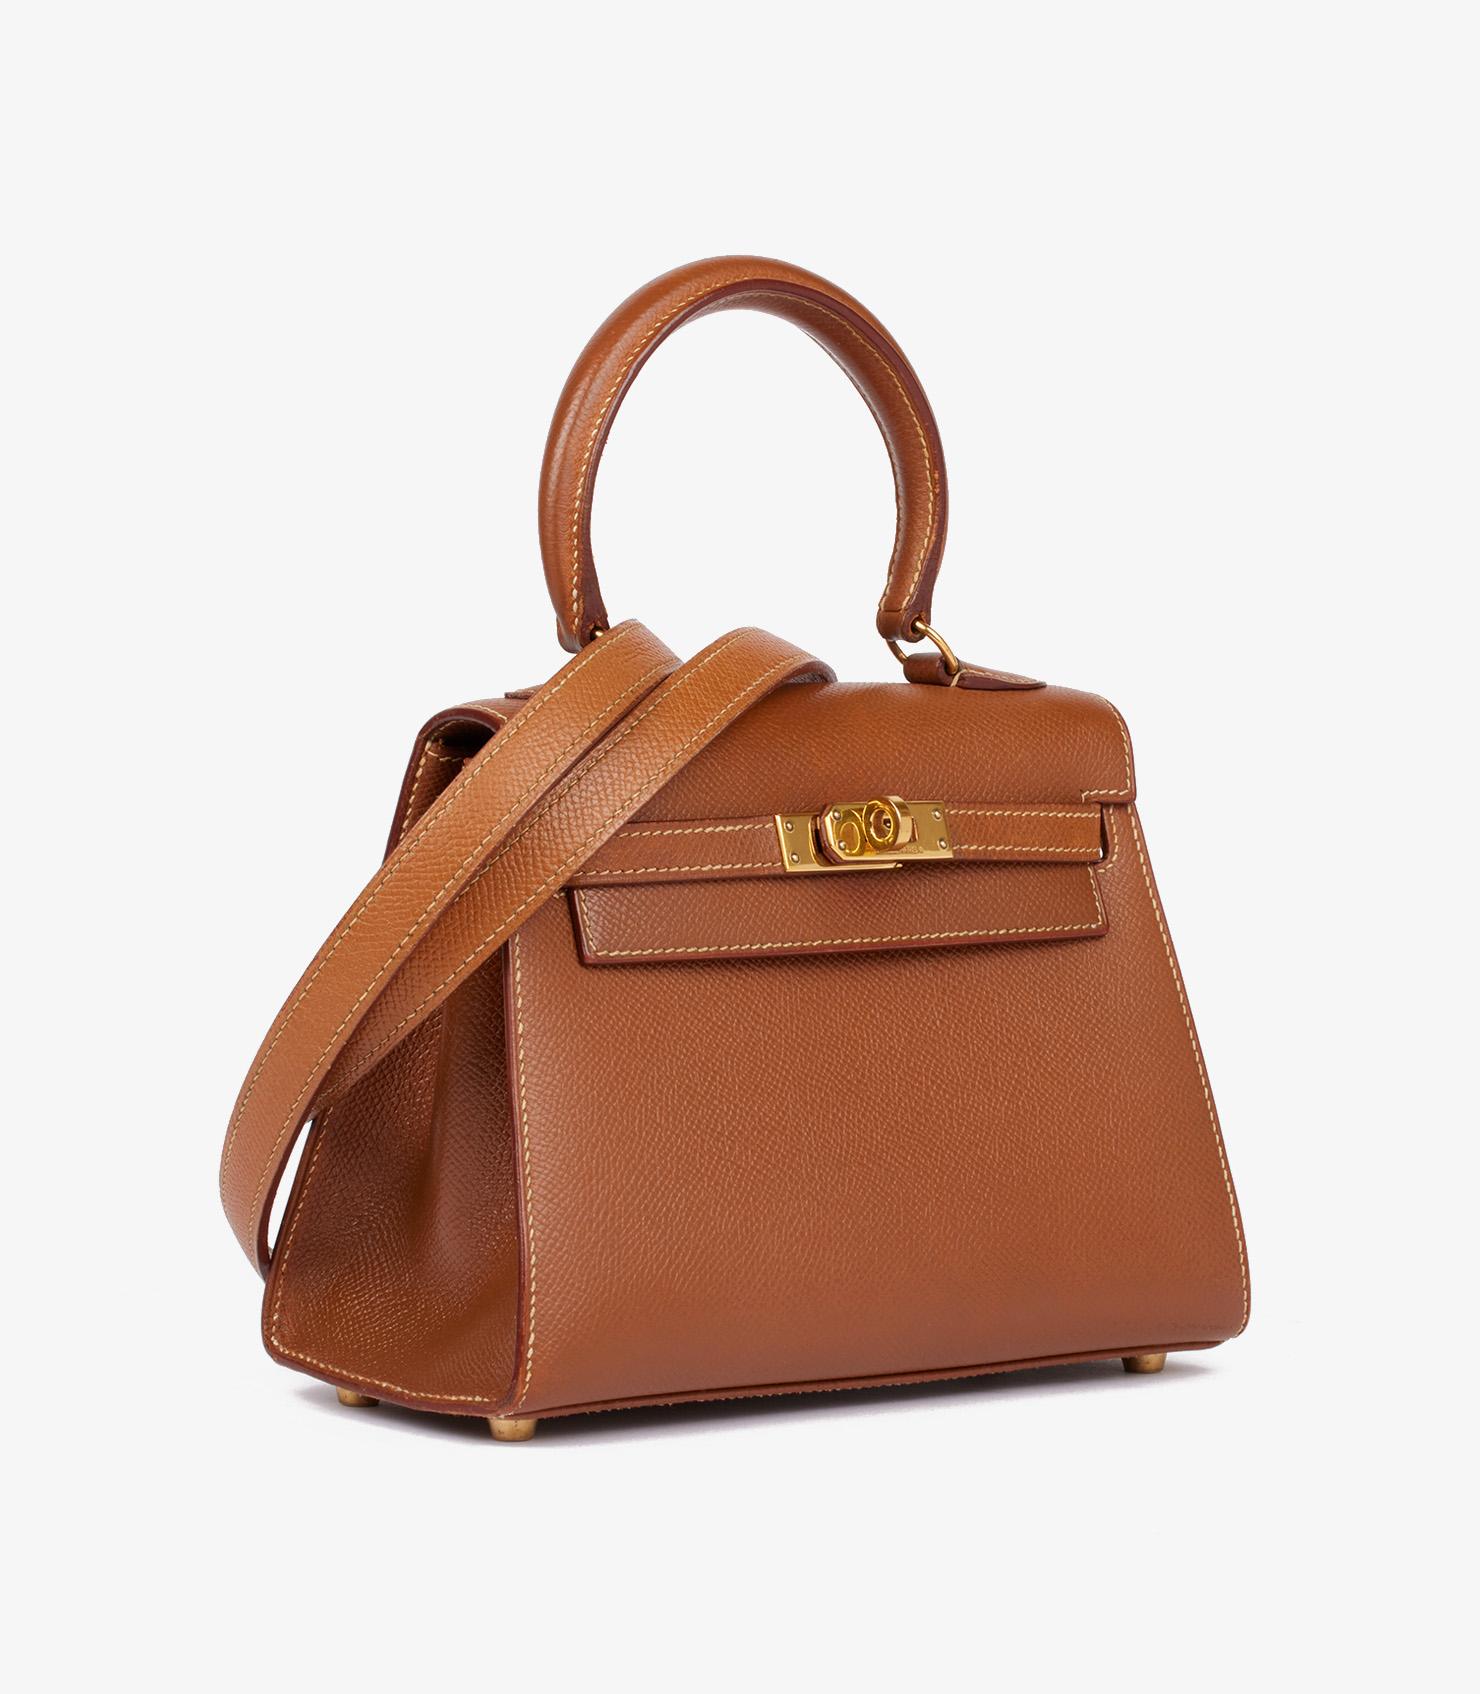 Hermès Gold Courchevel Leather Vintage Kelly 20cm

Brand- Hermès
Model- Kelly 20cm
Product Type- Top Handle
Serial Number- (X*
Age- Circa 1994
Accompanied By- Hermès Dust Bag, Shoulder Strap, Box, Ribbon
Colour- Gold
Hardware- Gold
Material(s)-